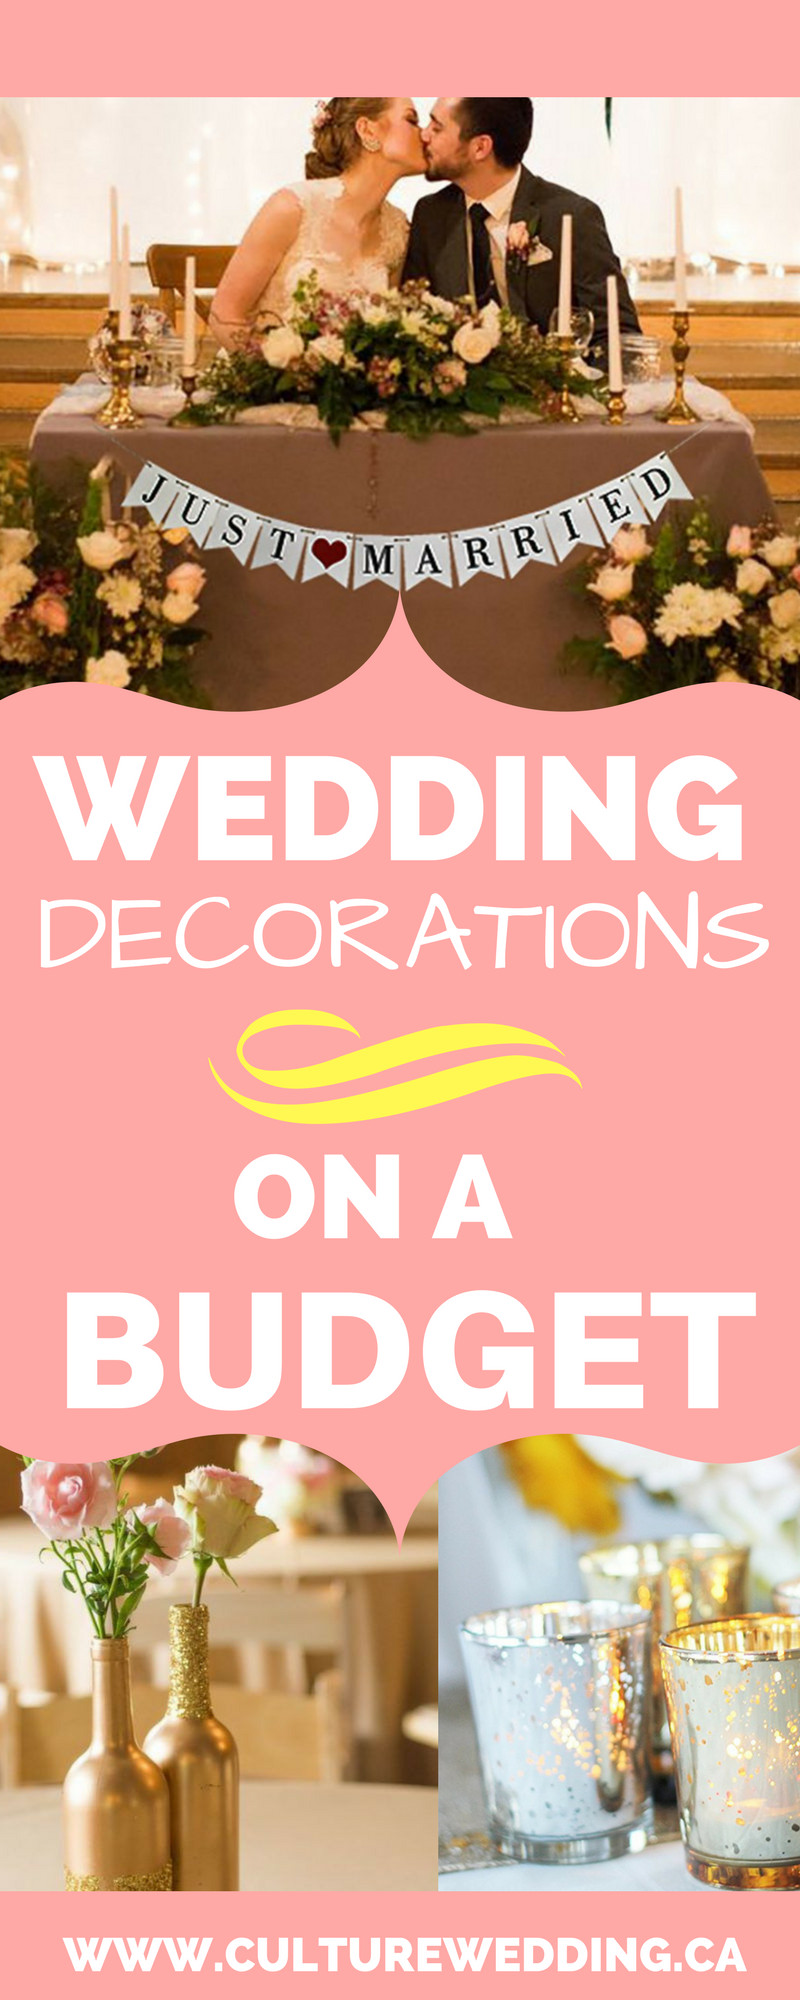 DIY Weddings On A Budget
 How to wedding decorations on a bud – Get them now